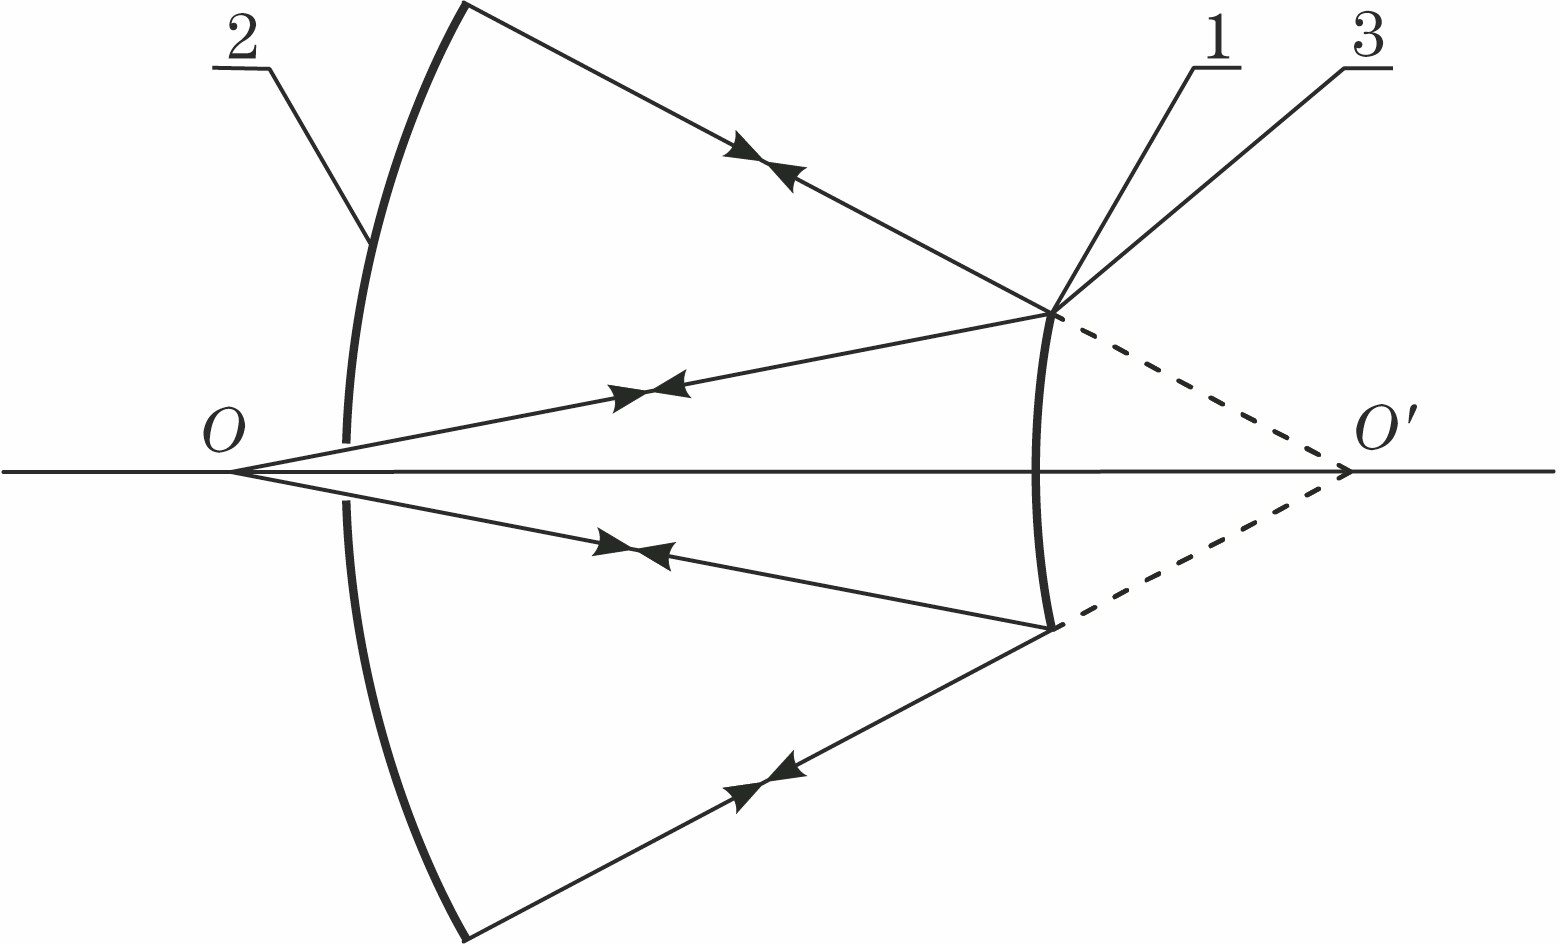 Hindle testing for the convex hyperboloid surface